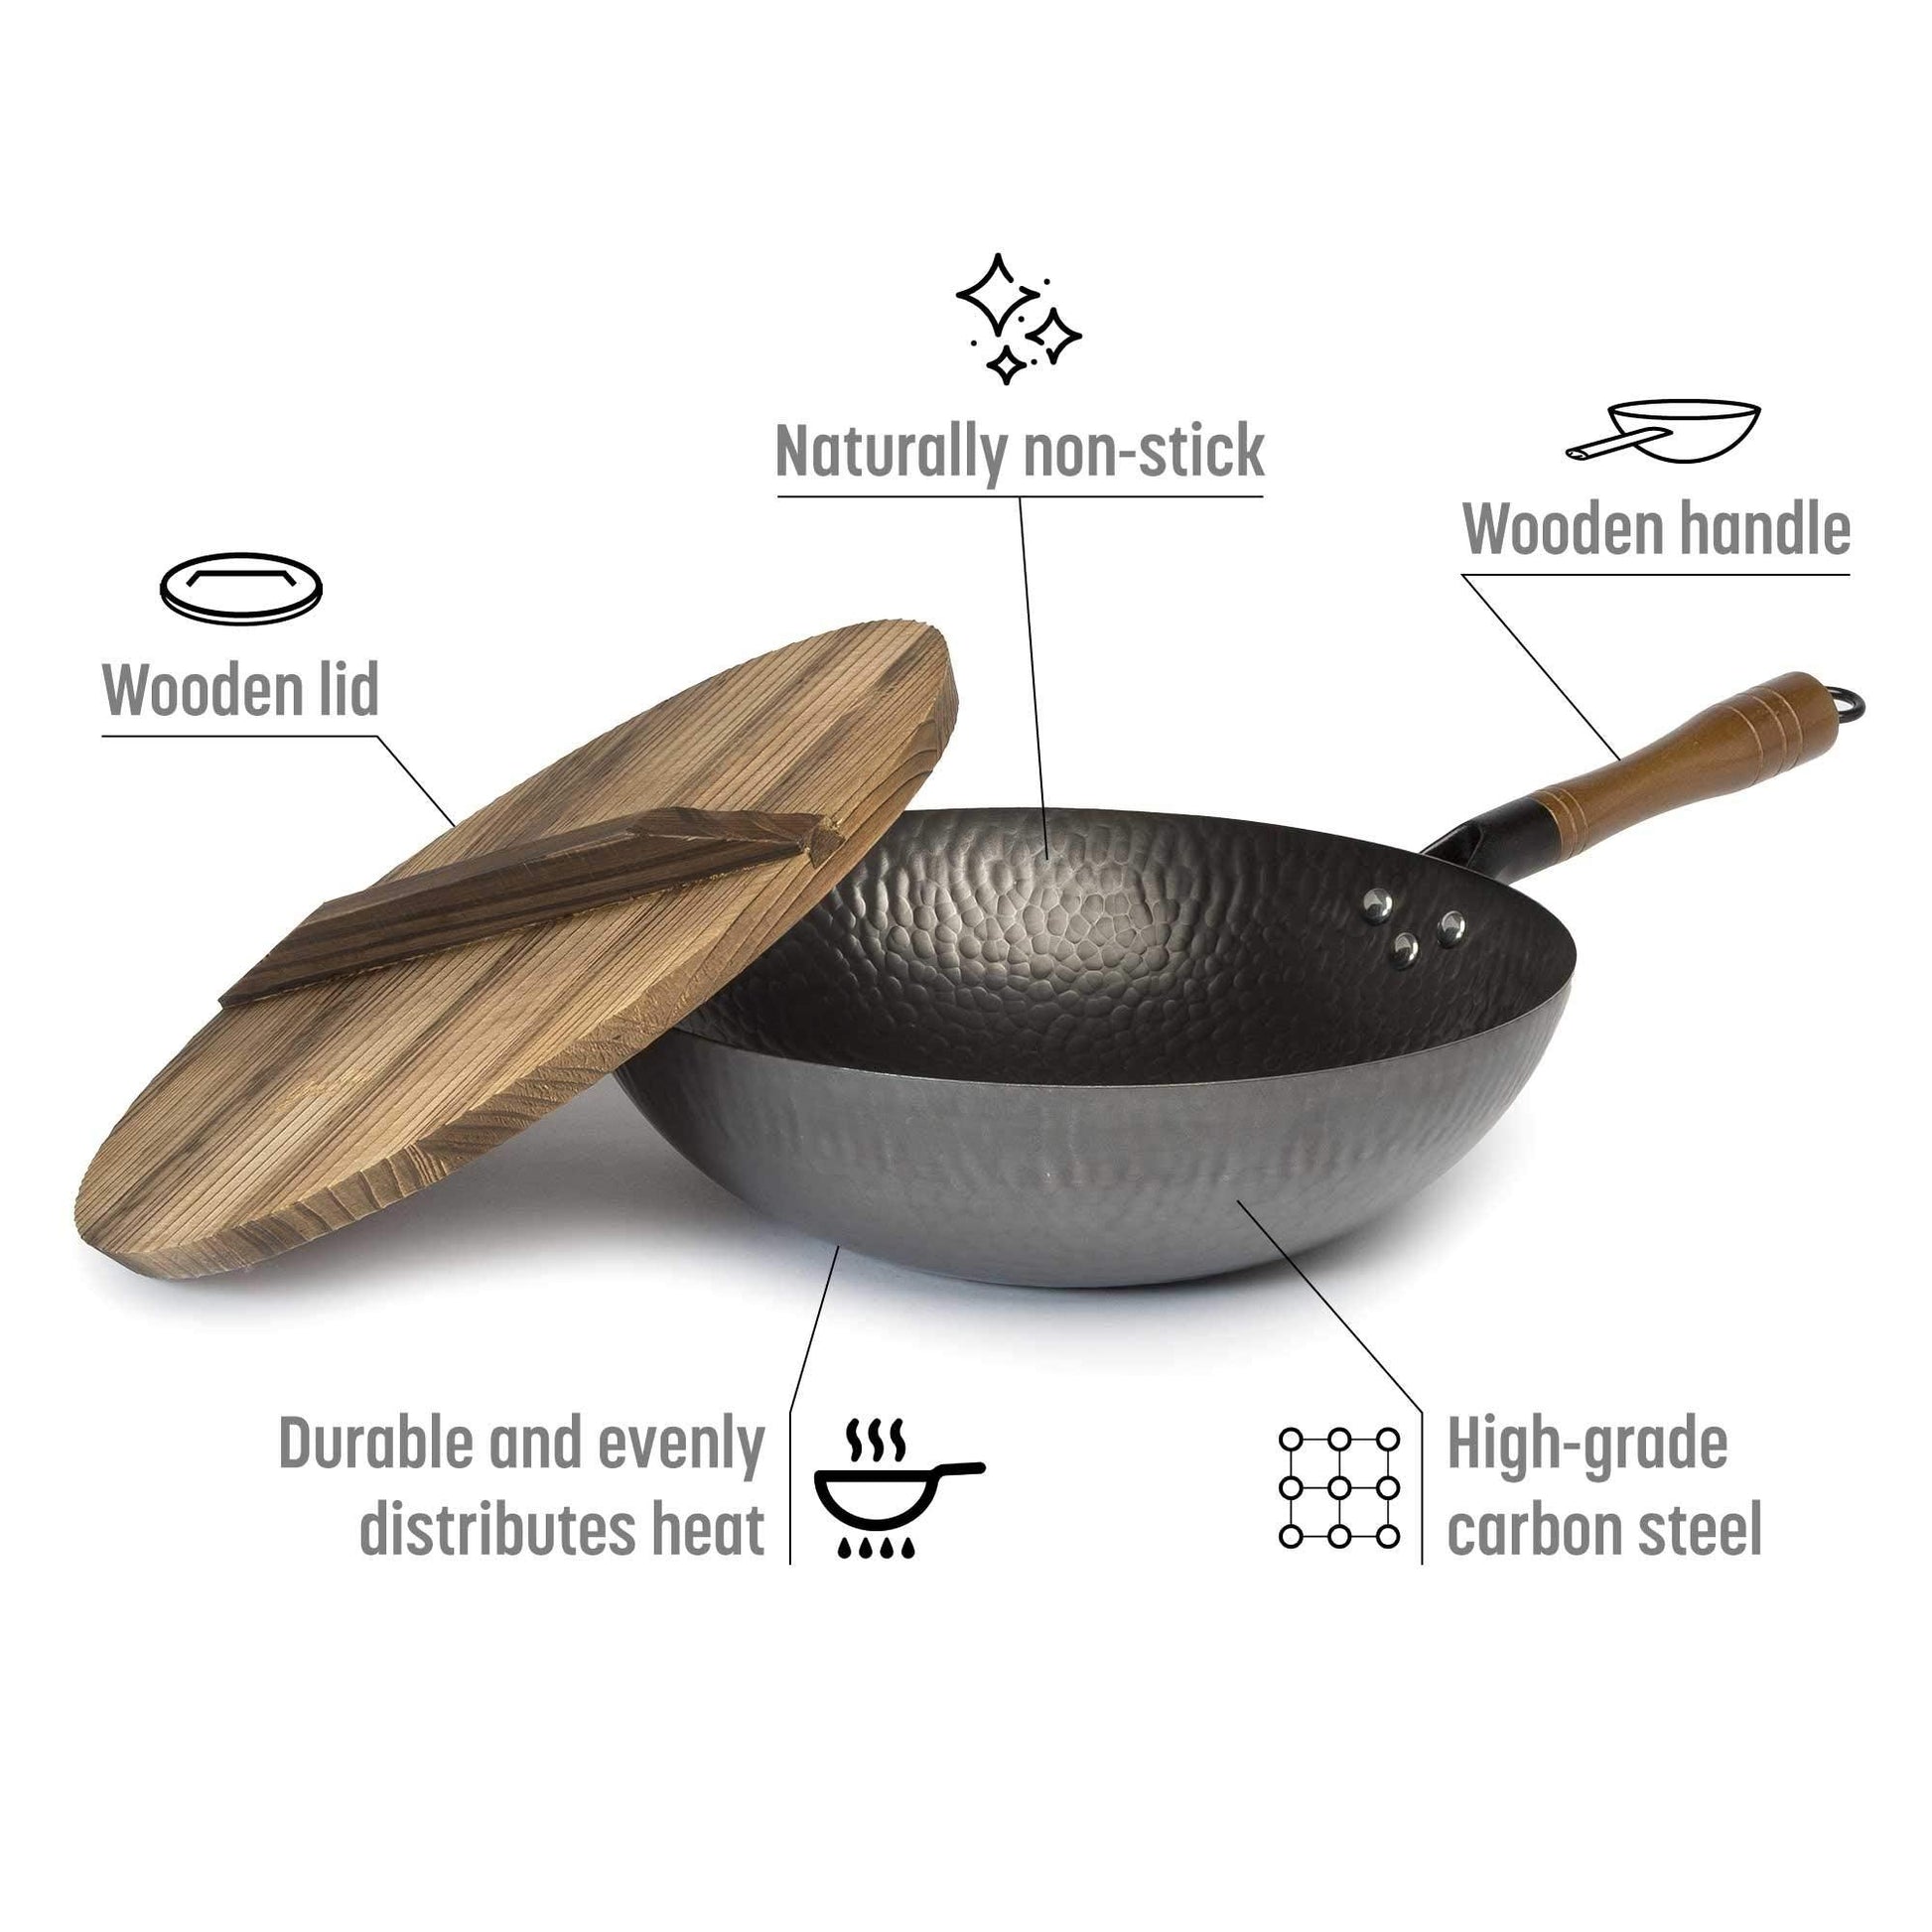 Goodful Hammered Carbon Steel 13-Inch Wok Pan with Lid, Black, Non-Stick, Compatible with Most Cooktops - CookCave